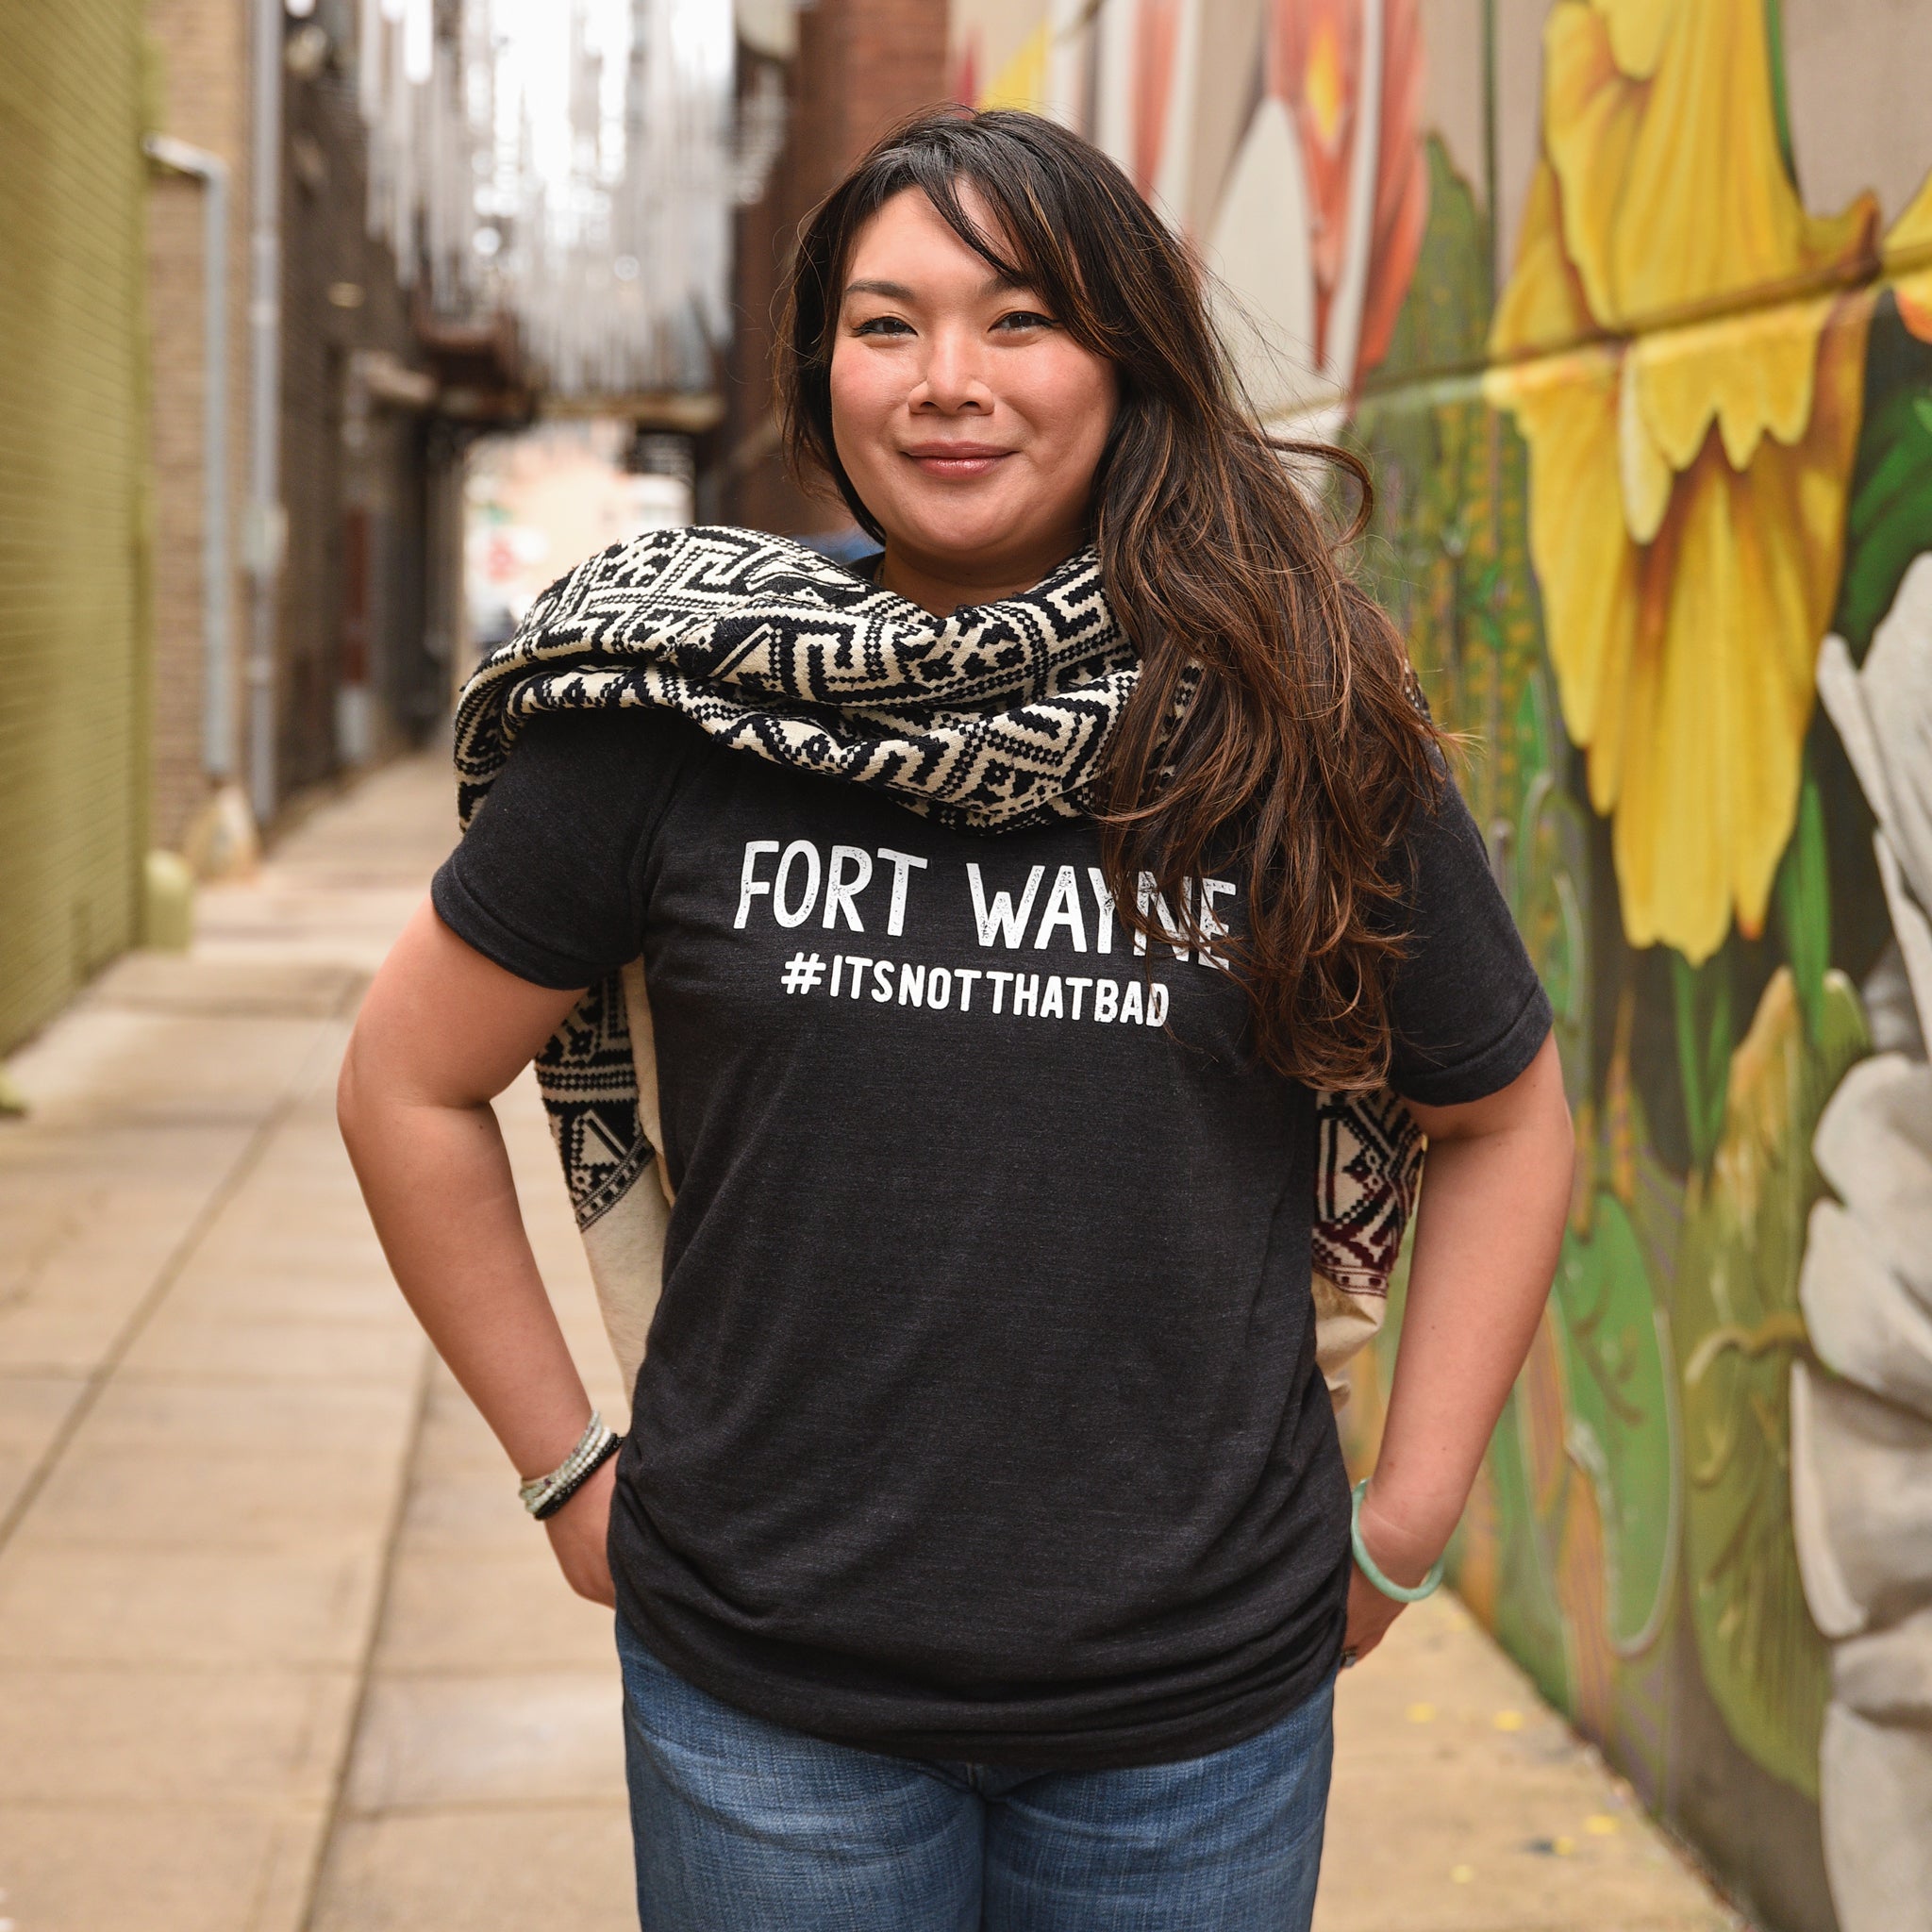 Fort Wayne #itsnotthatbad black heather t-shirt on model with scarf by mural